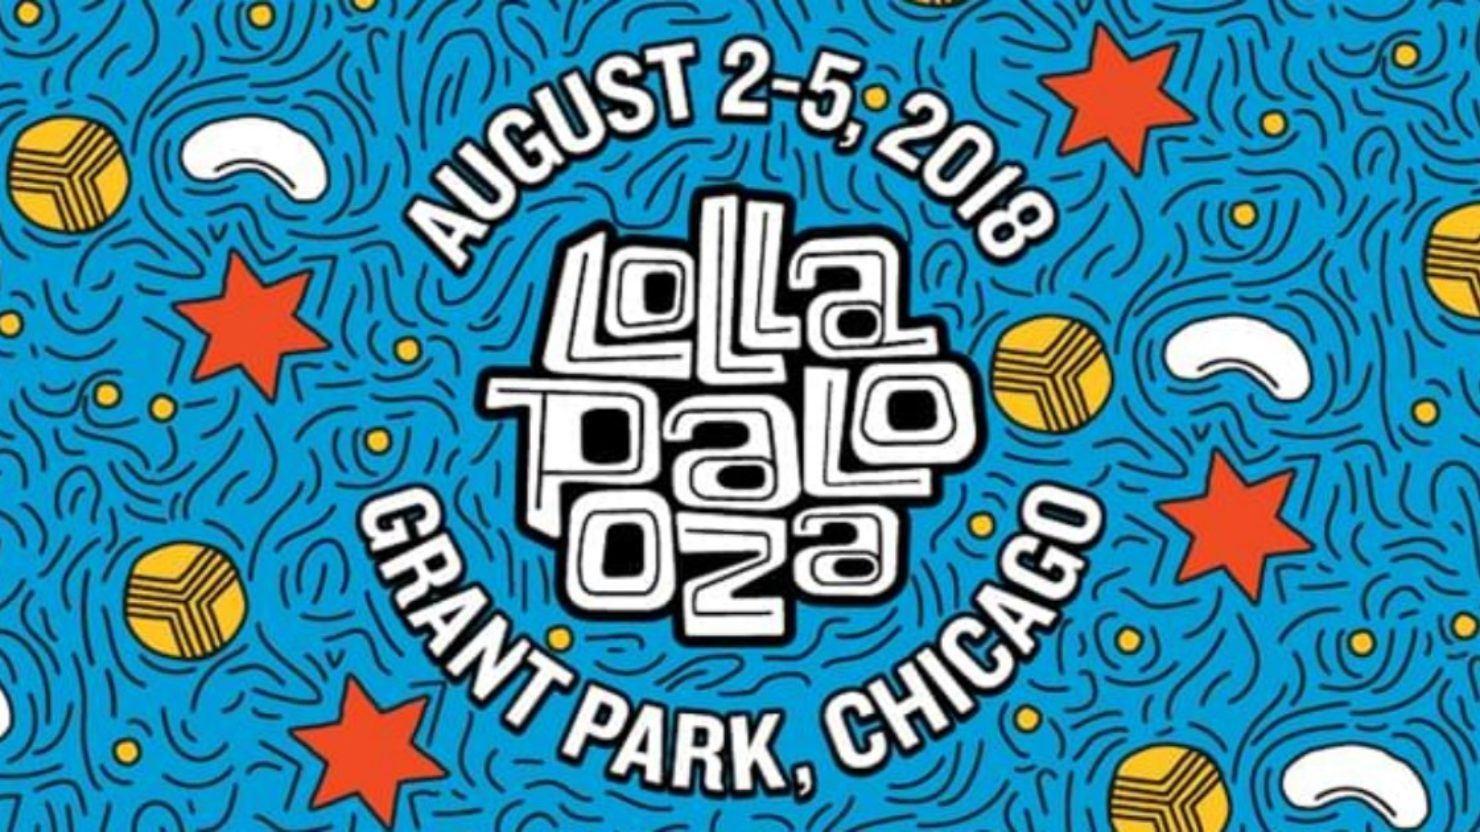 Summer 2018 Music Festival Roundup: Warped, Lollapalooza, & More